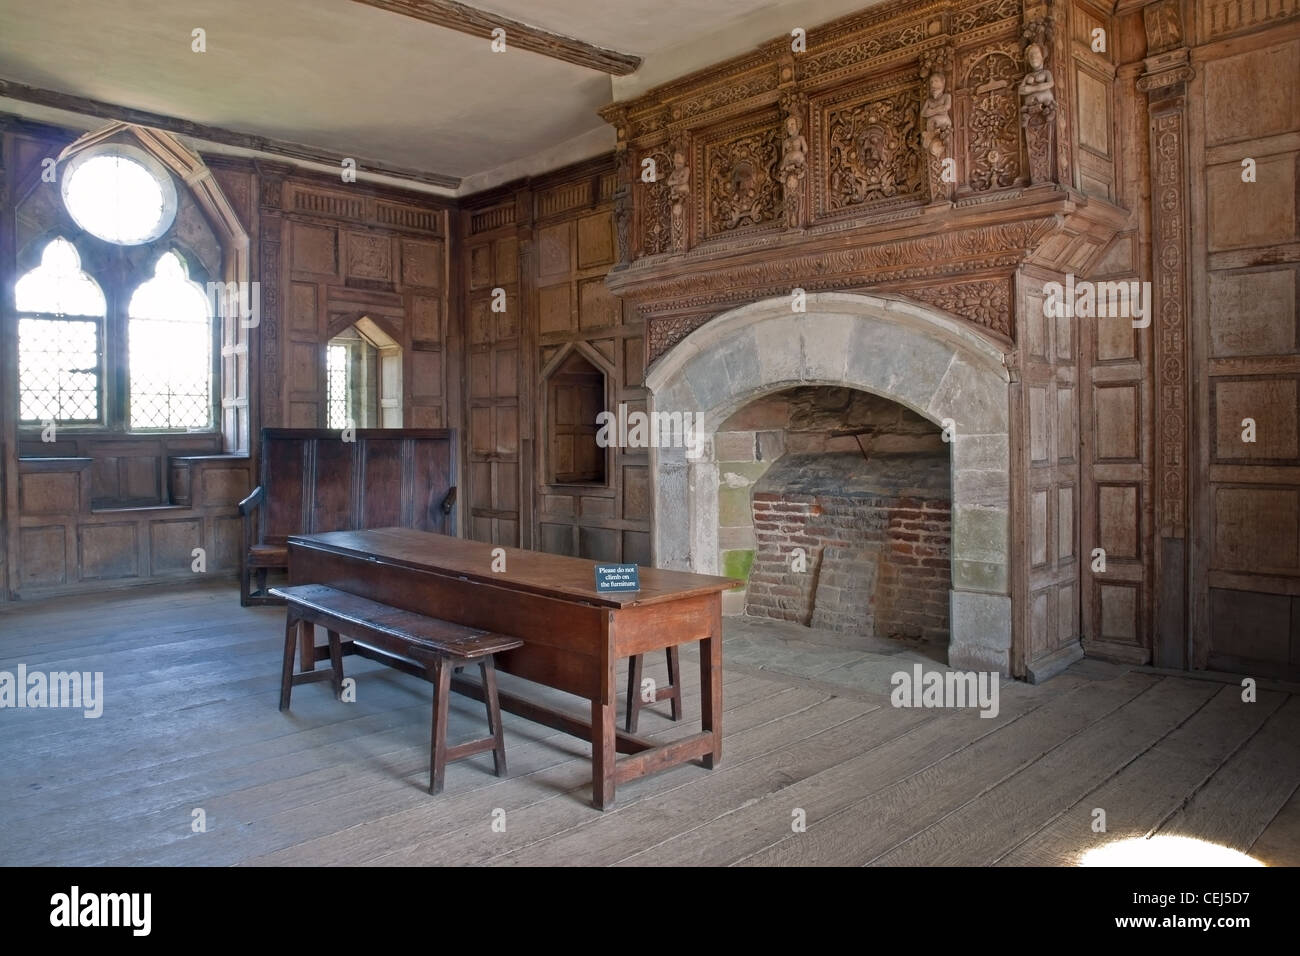 Interior of a room in Stokesay Castle, a fortified manor house at Stokesay, Shropshire, with carved paneling and a fireplace. Stock Photo